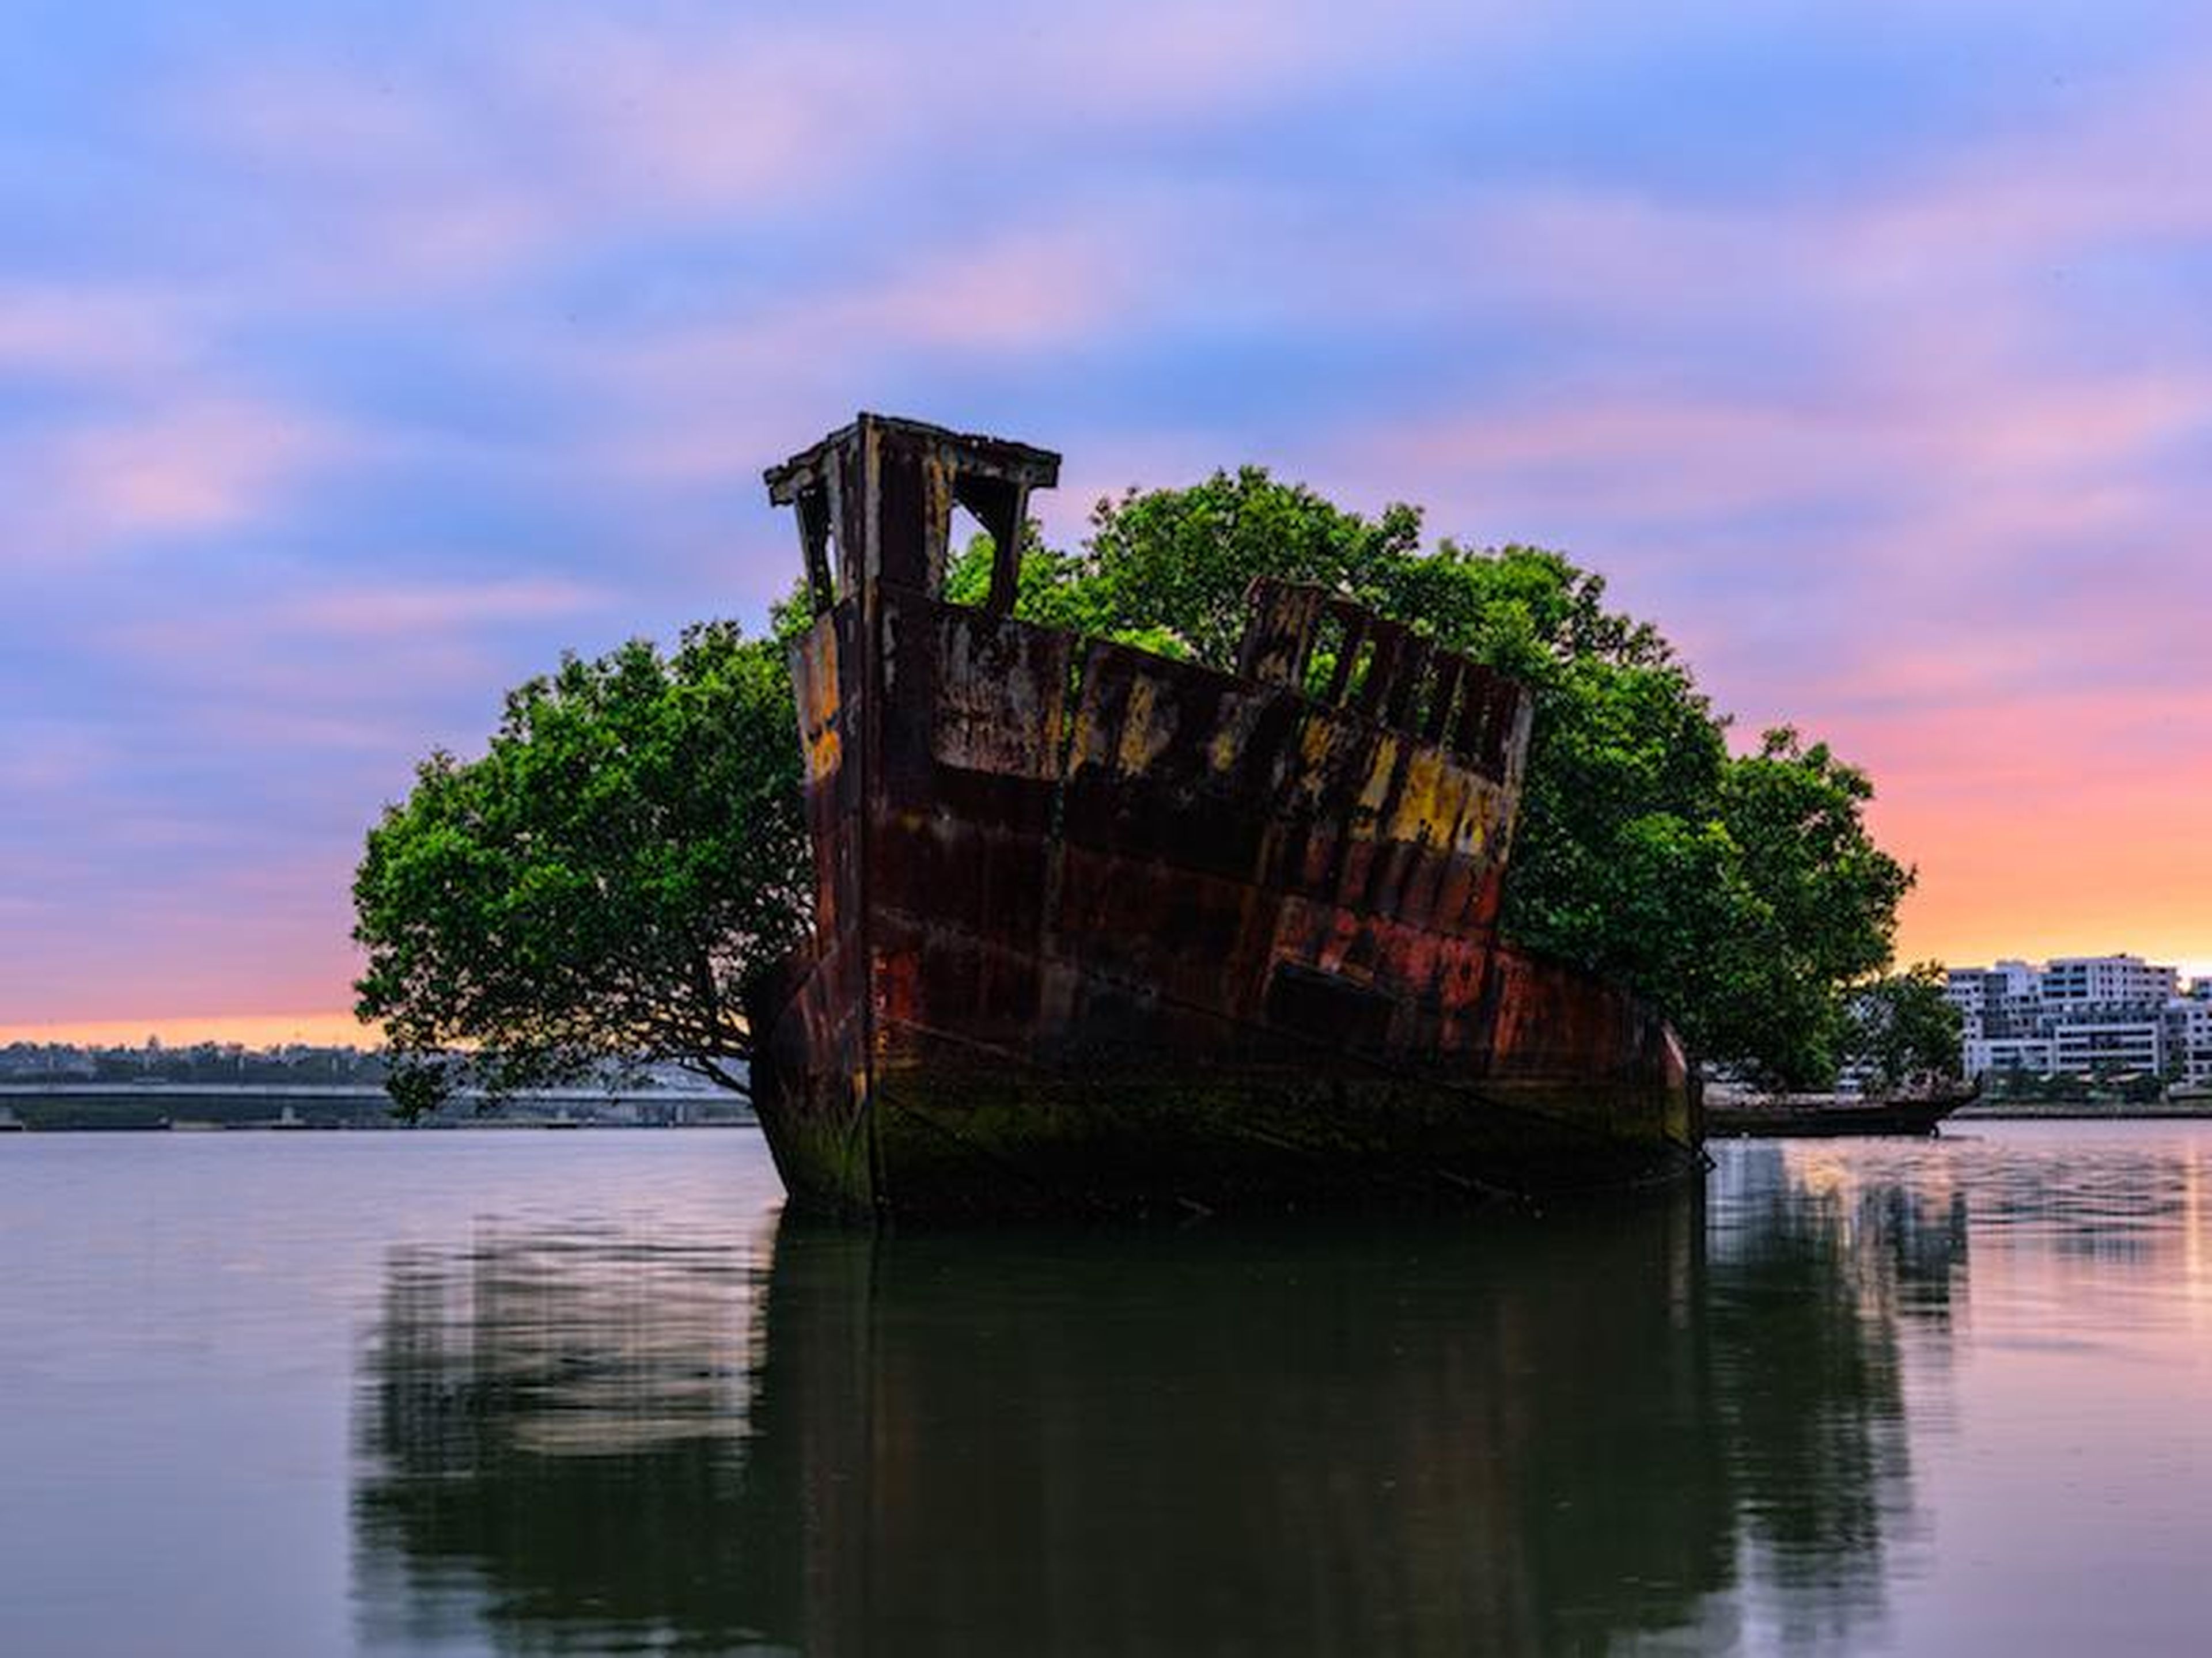 The SS Ayrfield has gone from military ship to a beautiful forest on the water.